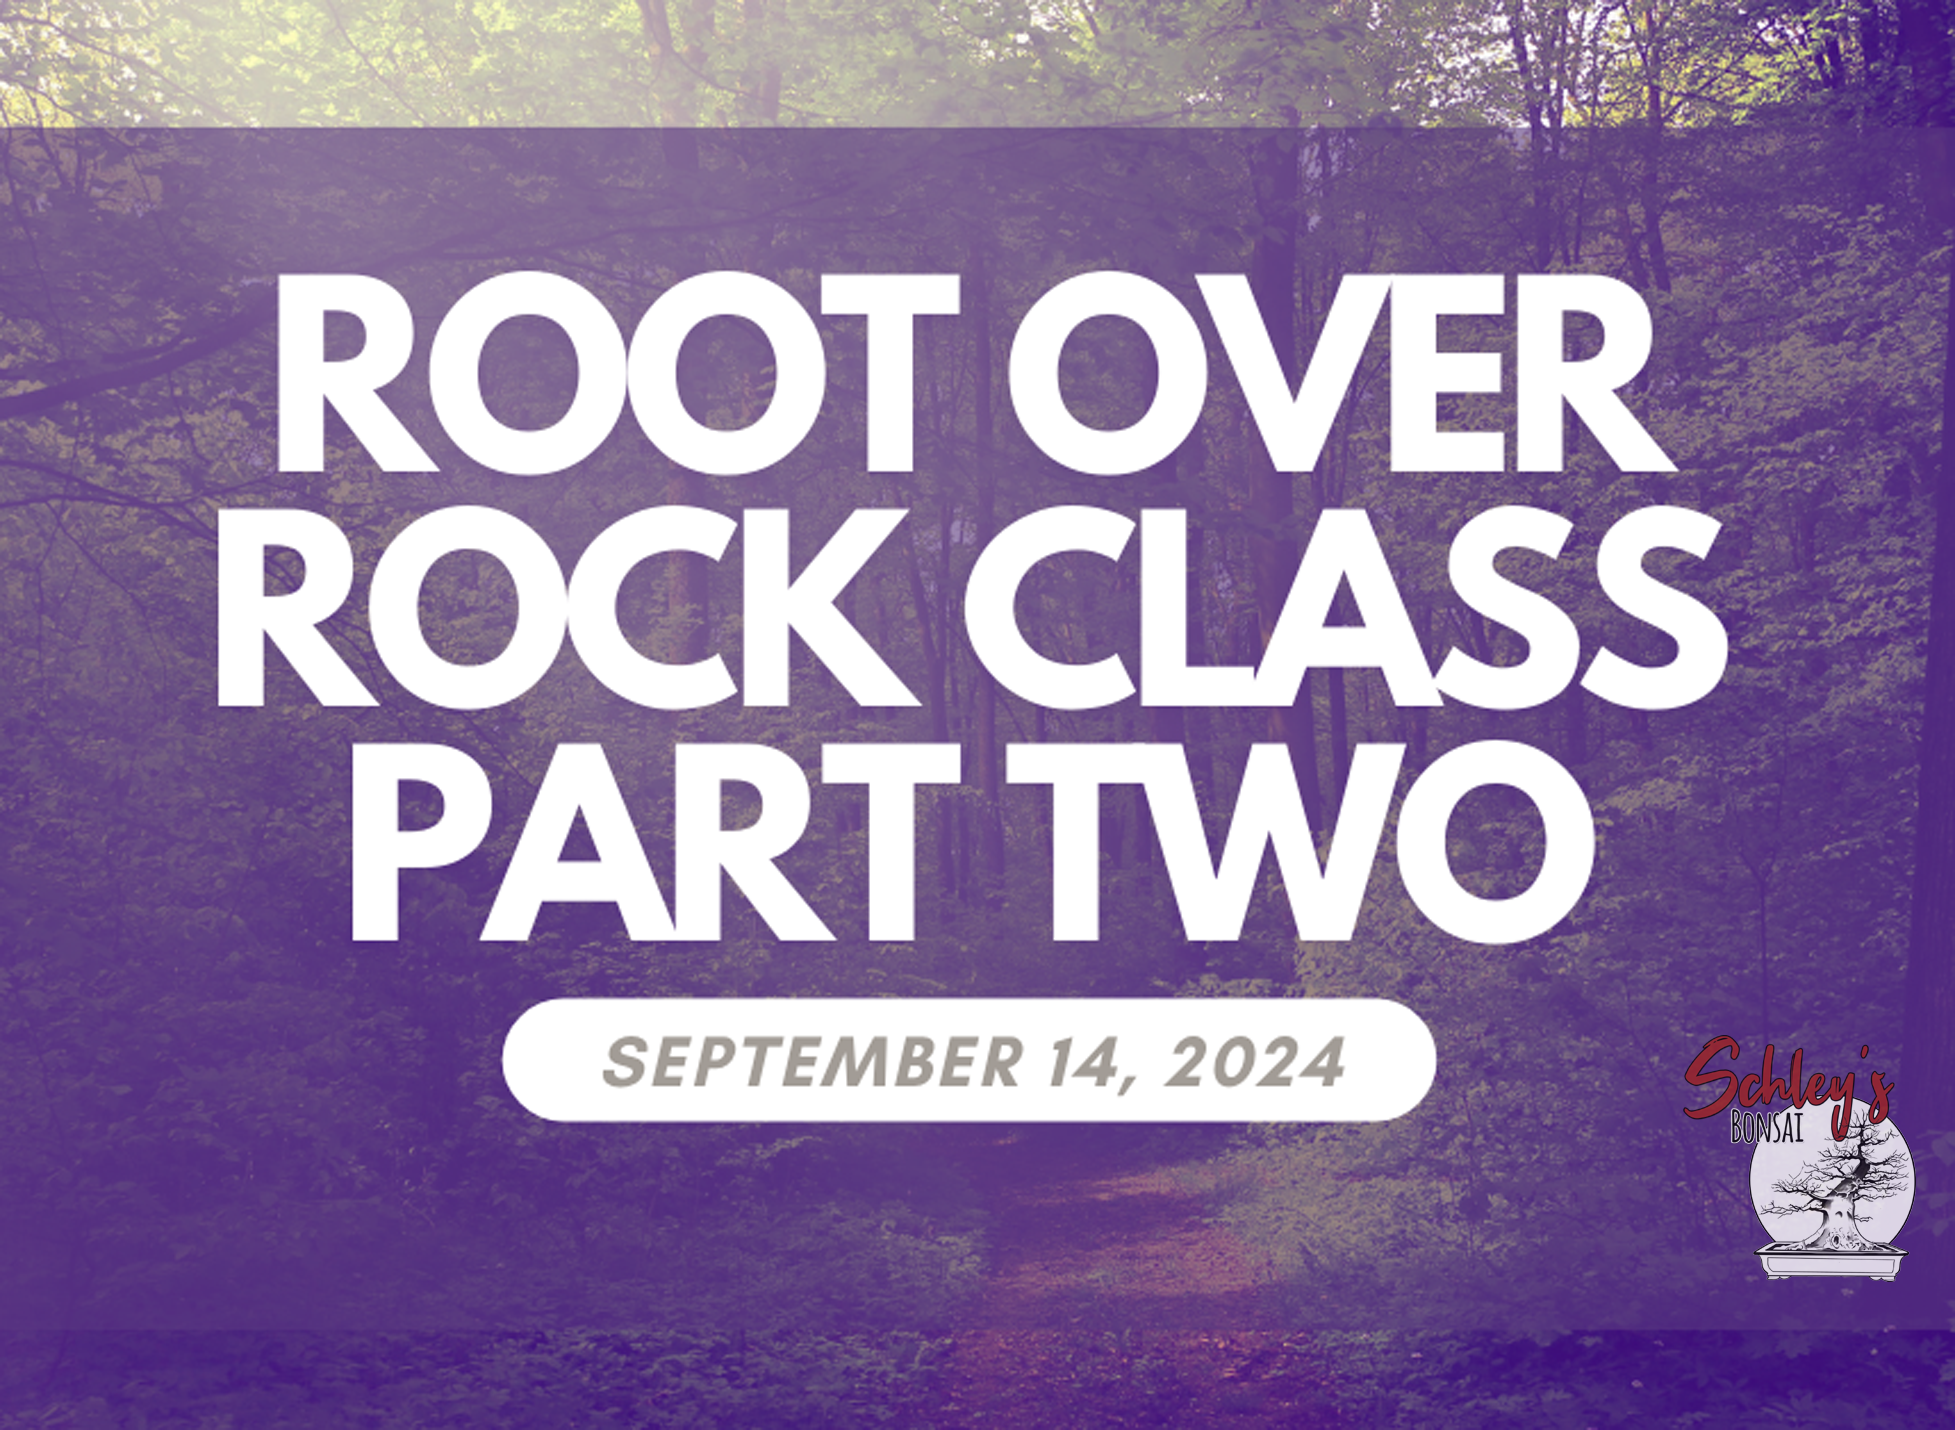 Advanced Root Over Rock Class (Part Two) - September 14th, 2024 @ 9AM - 12PM